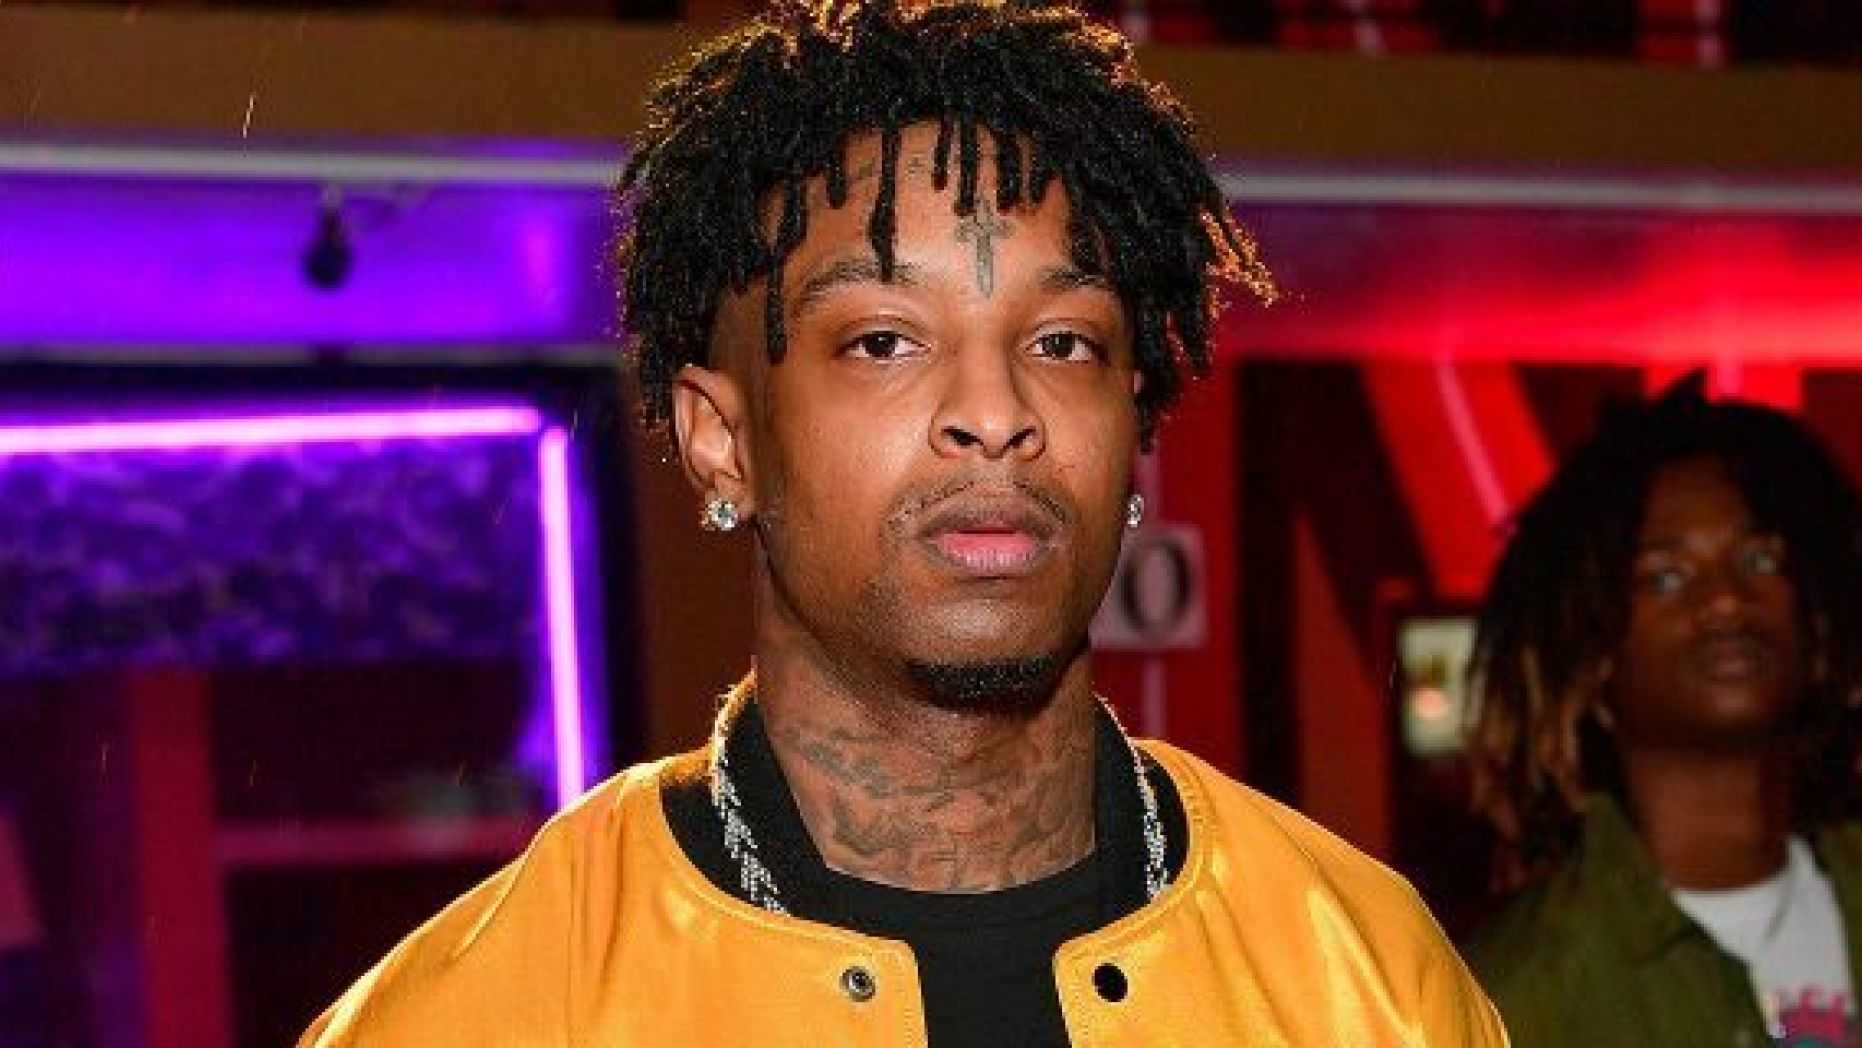 The Final Performer For The Amazon Music Live Concert Series In 2022 Will Be 21 Savage